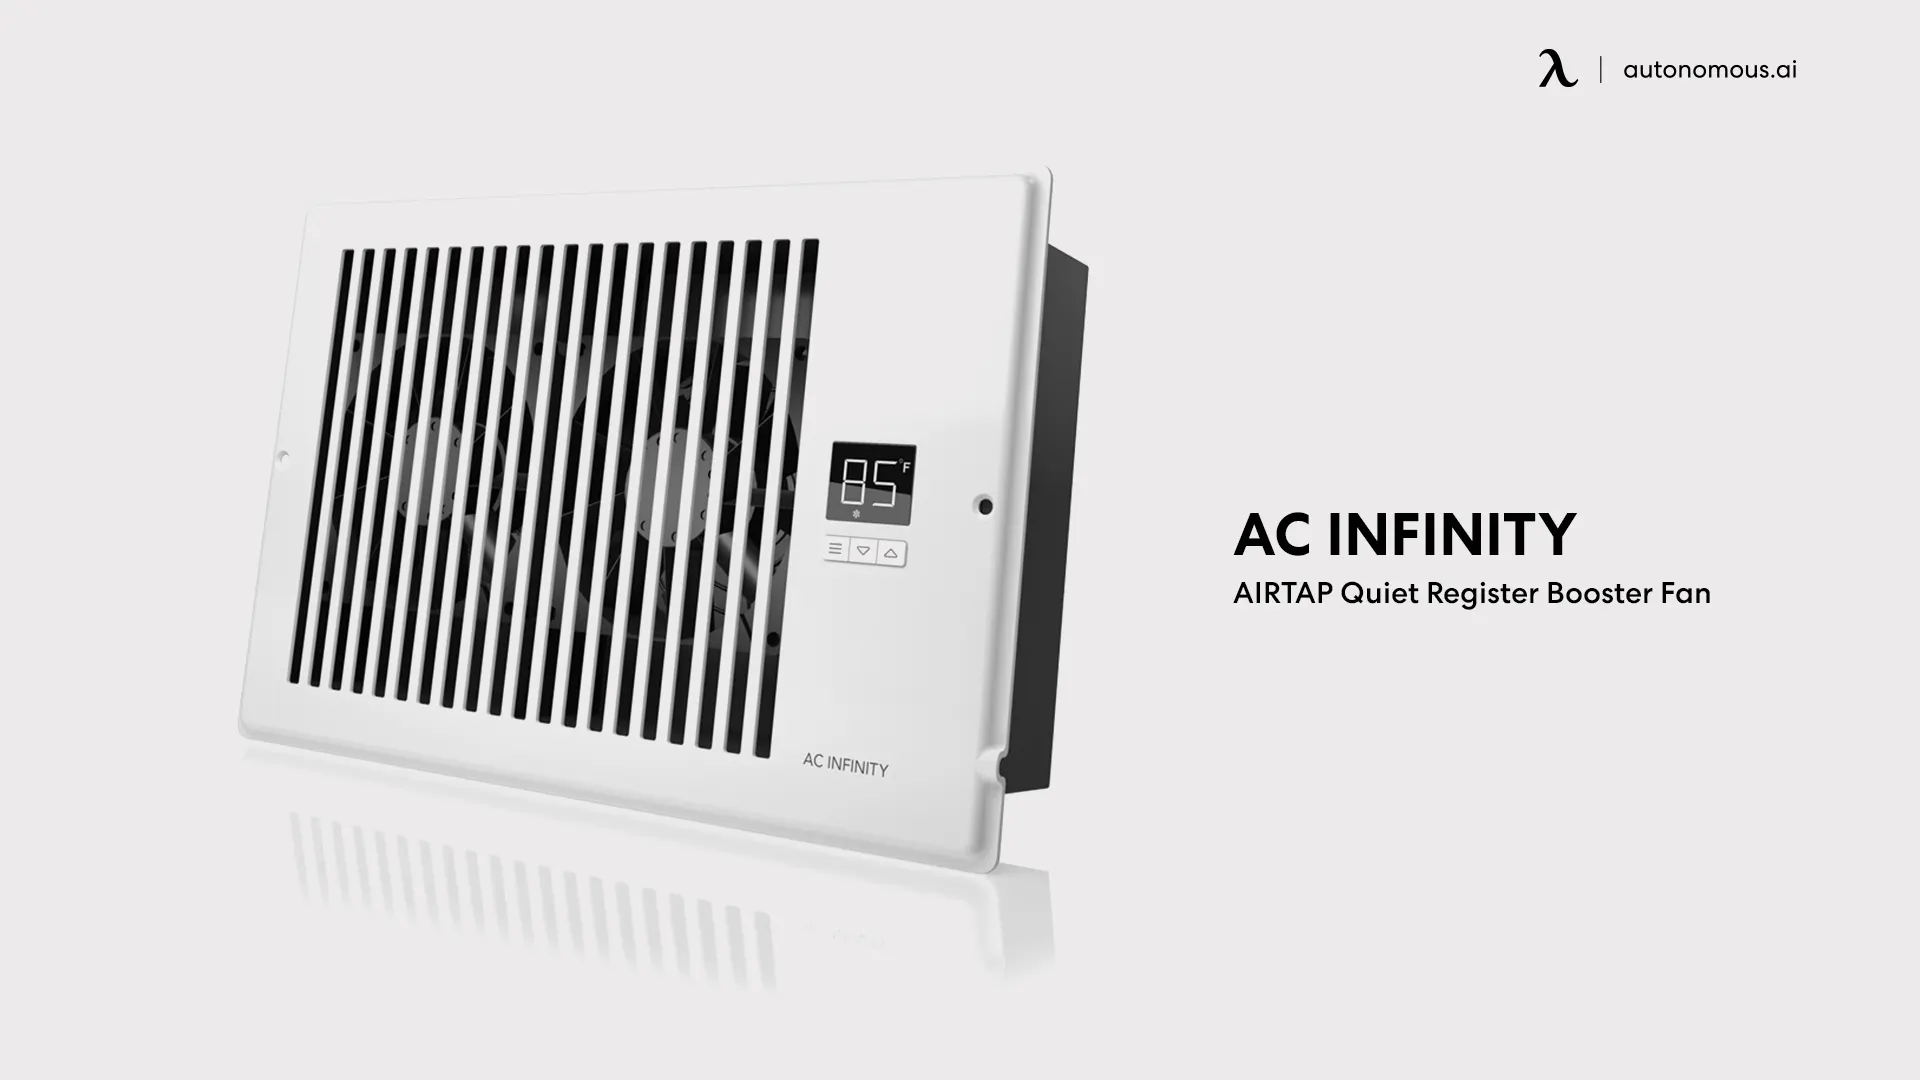 AIRTAP Quiet Register Booster Fan by AC Infinity